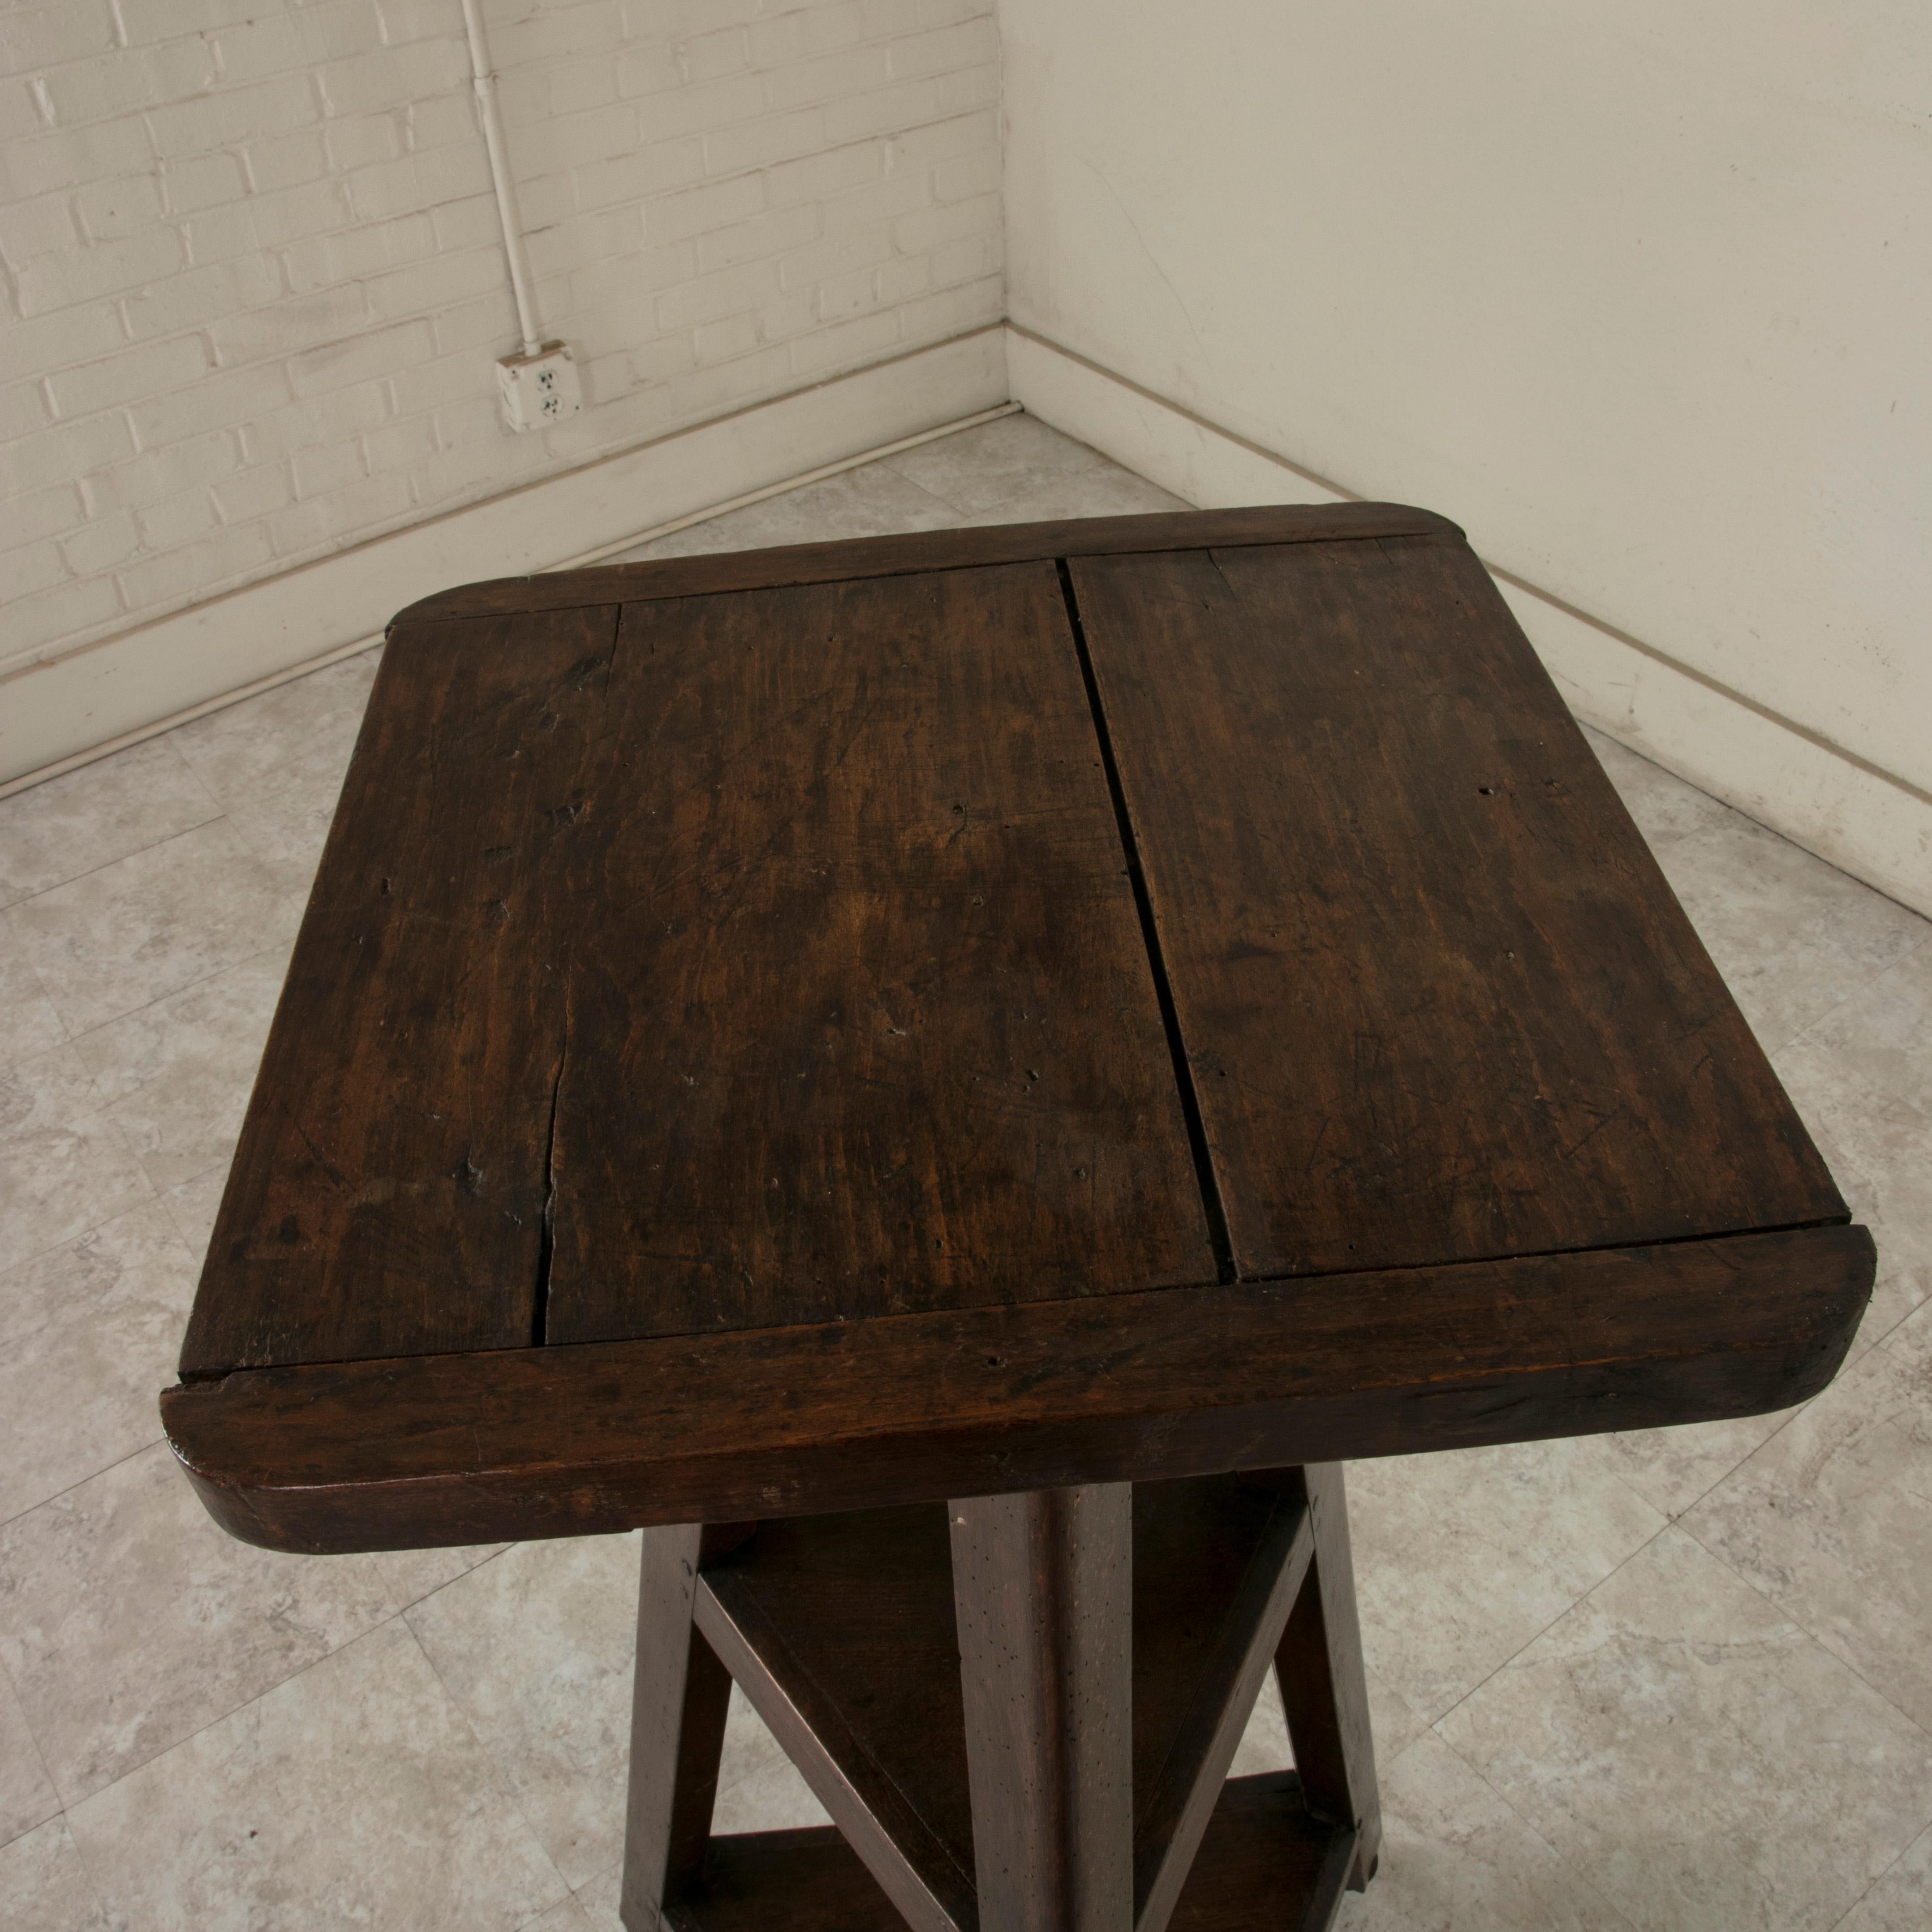 Early 20th Century Artisan-Made Oak and Beechwood French Sculptor's Table, circa 1900